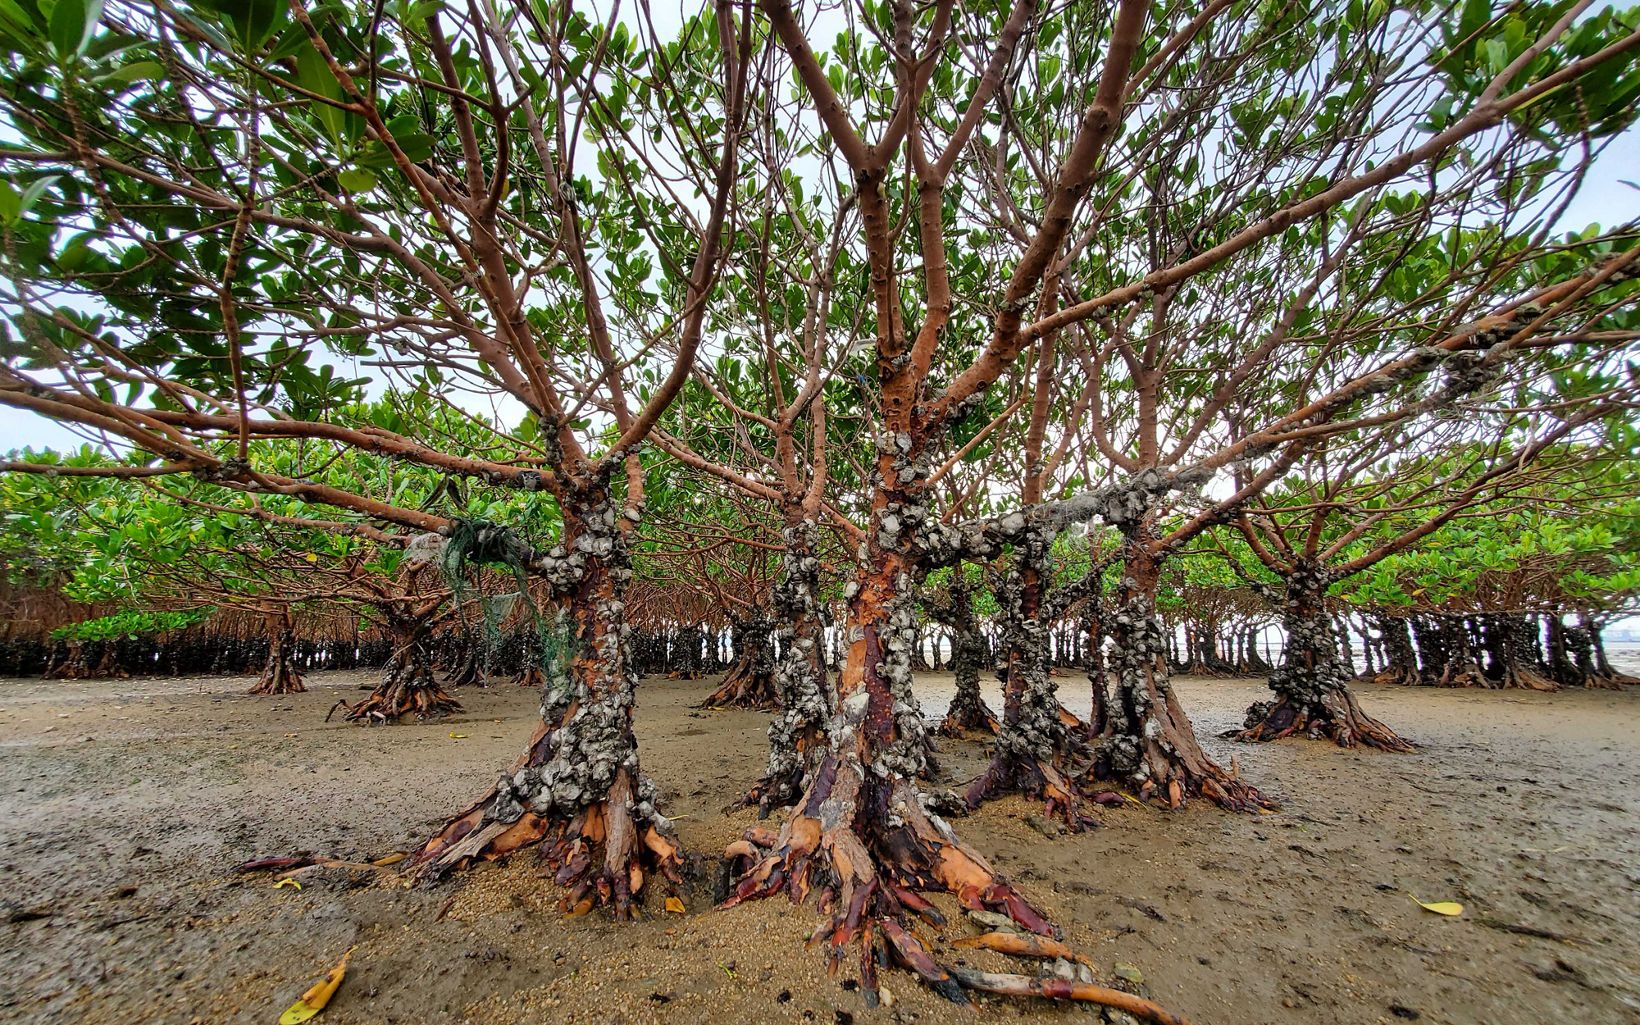 A group of mangroves at low tide with their roots exposed.